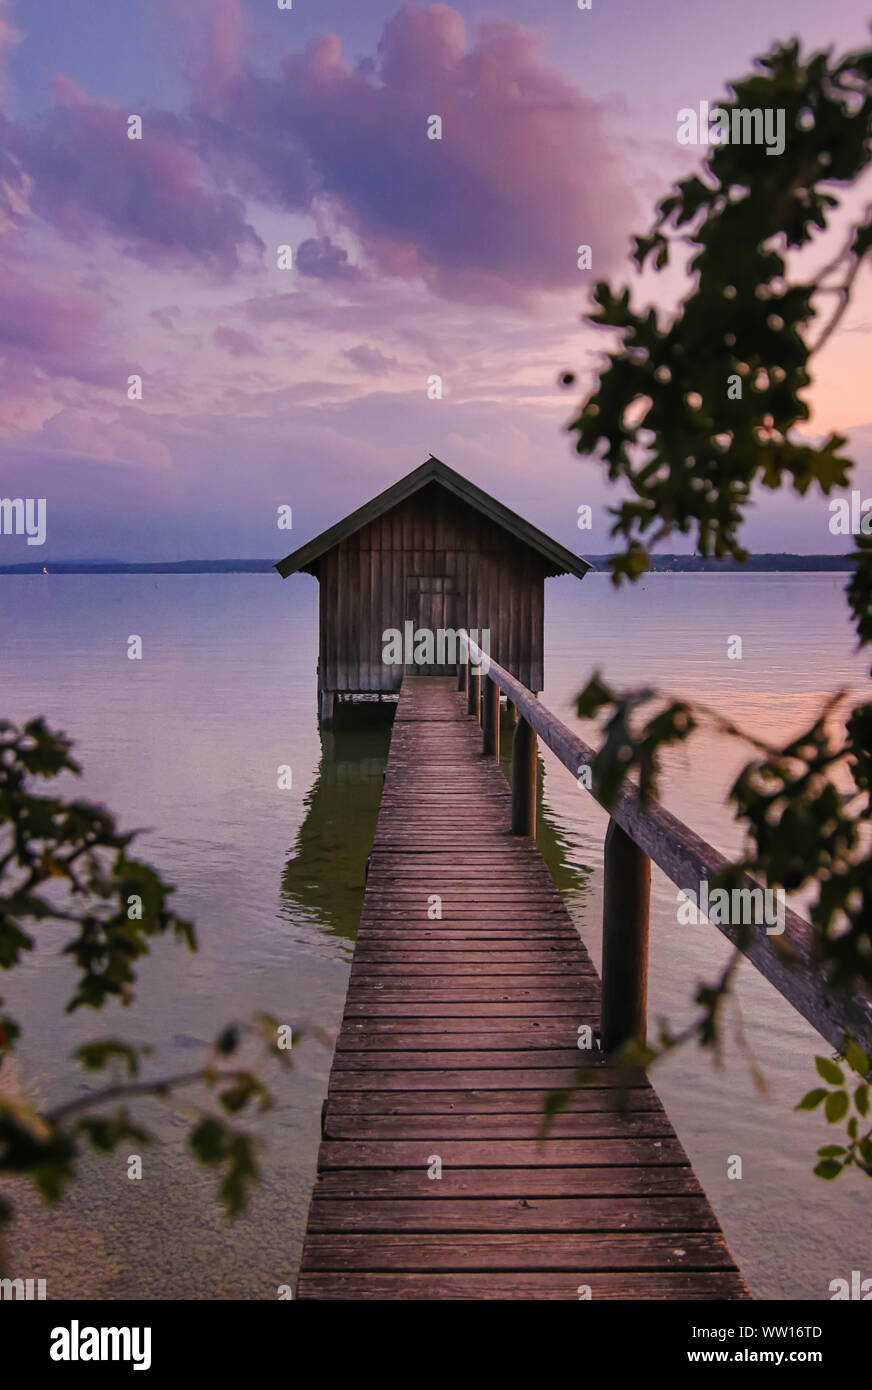 peaceful violet sunset with boat house at lake Ammersee Stock Photo